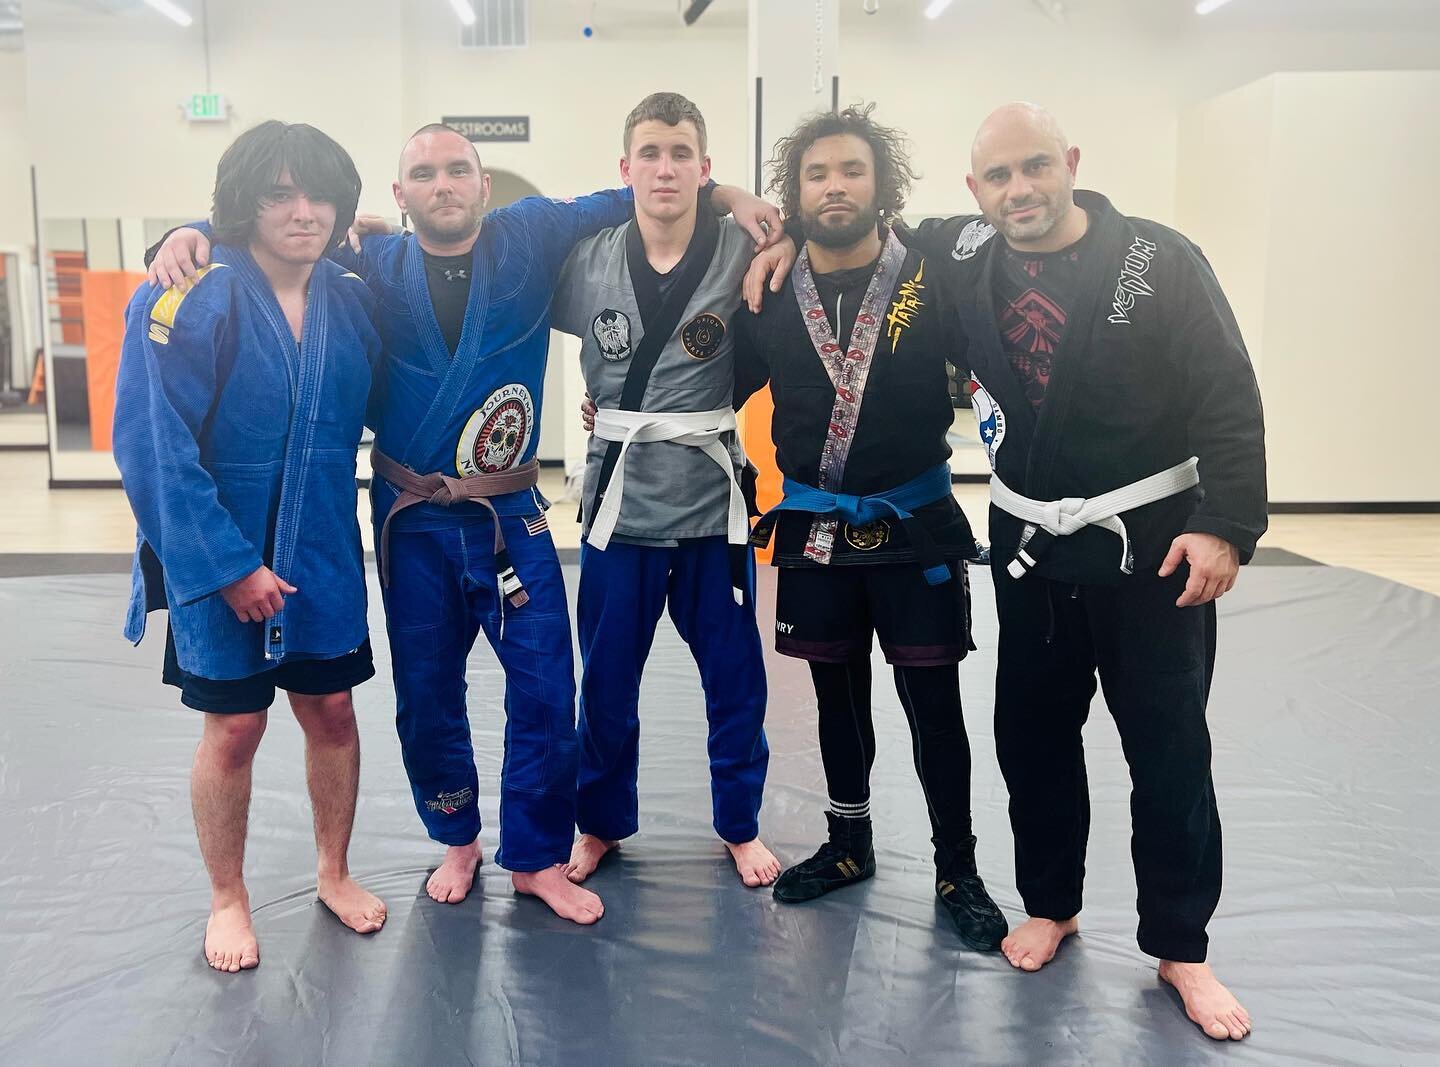 Brazilian Jiu-Jitsu class with a Wrestling Team Champion guest from Juanita High School, as well as our Combat Sambo instructor @henryagjz &mdash;Come learn with us, and take that first step to get out of your comfort zone. The excuses stop here! Joi